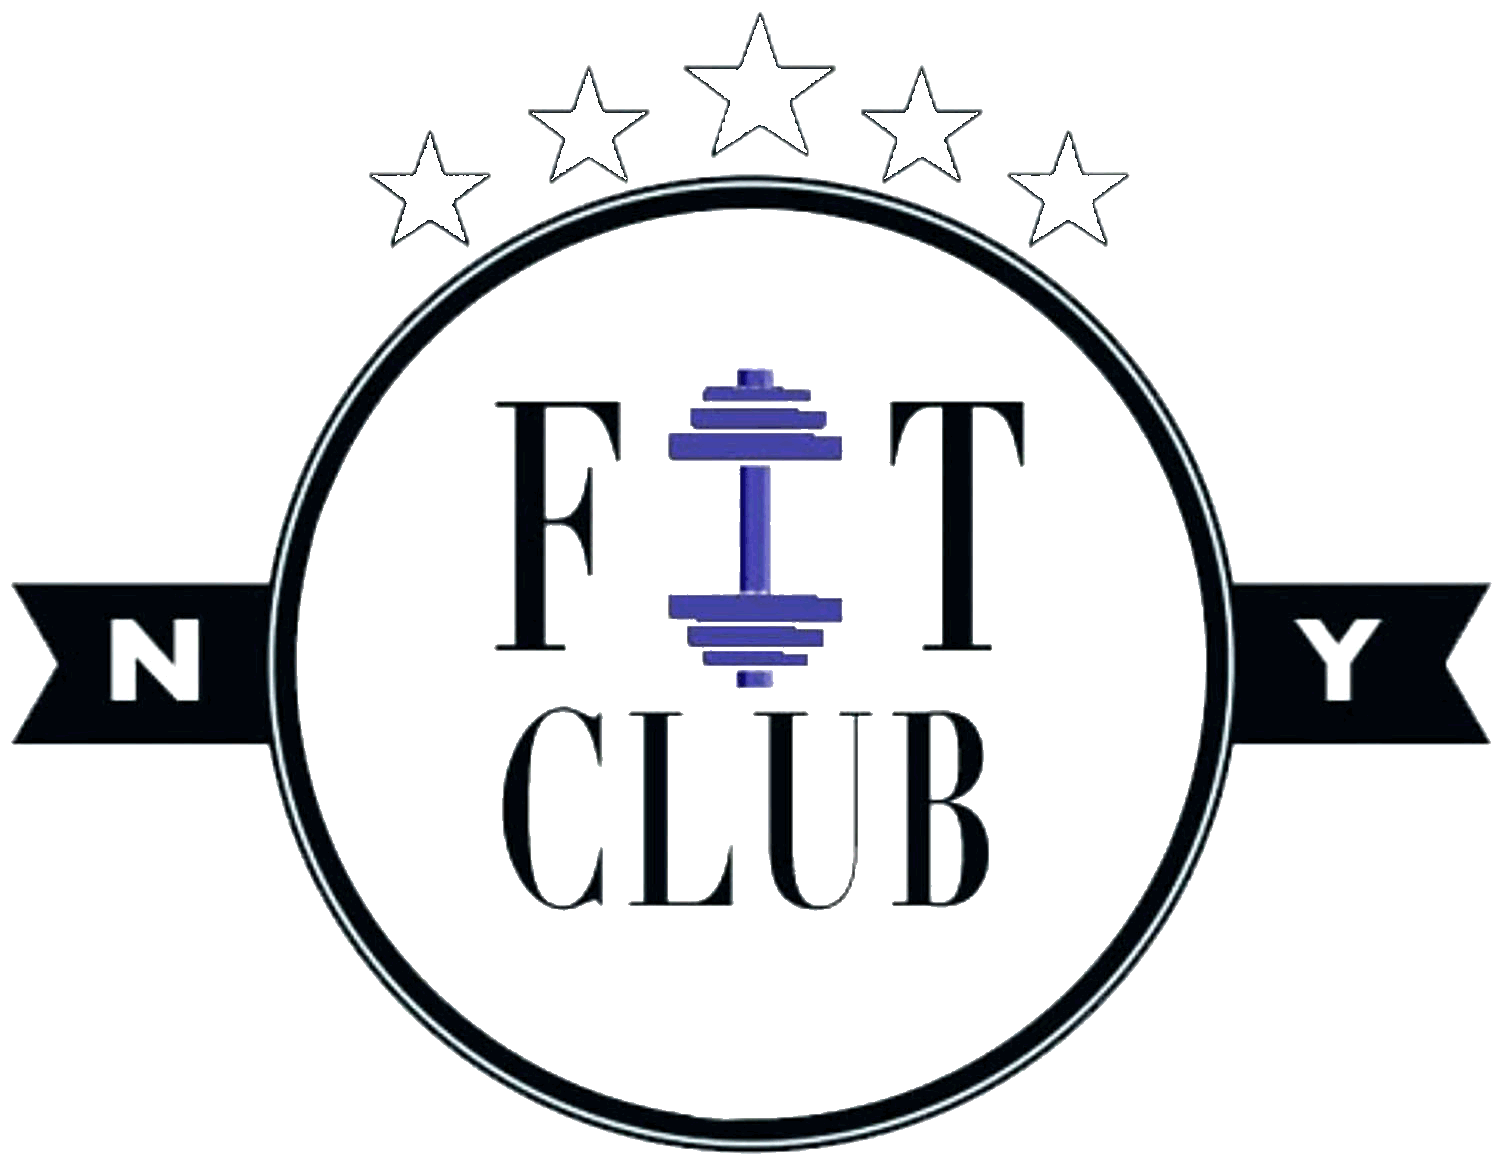 Fit Club Ny Next Level Physical Therapy In Nyc